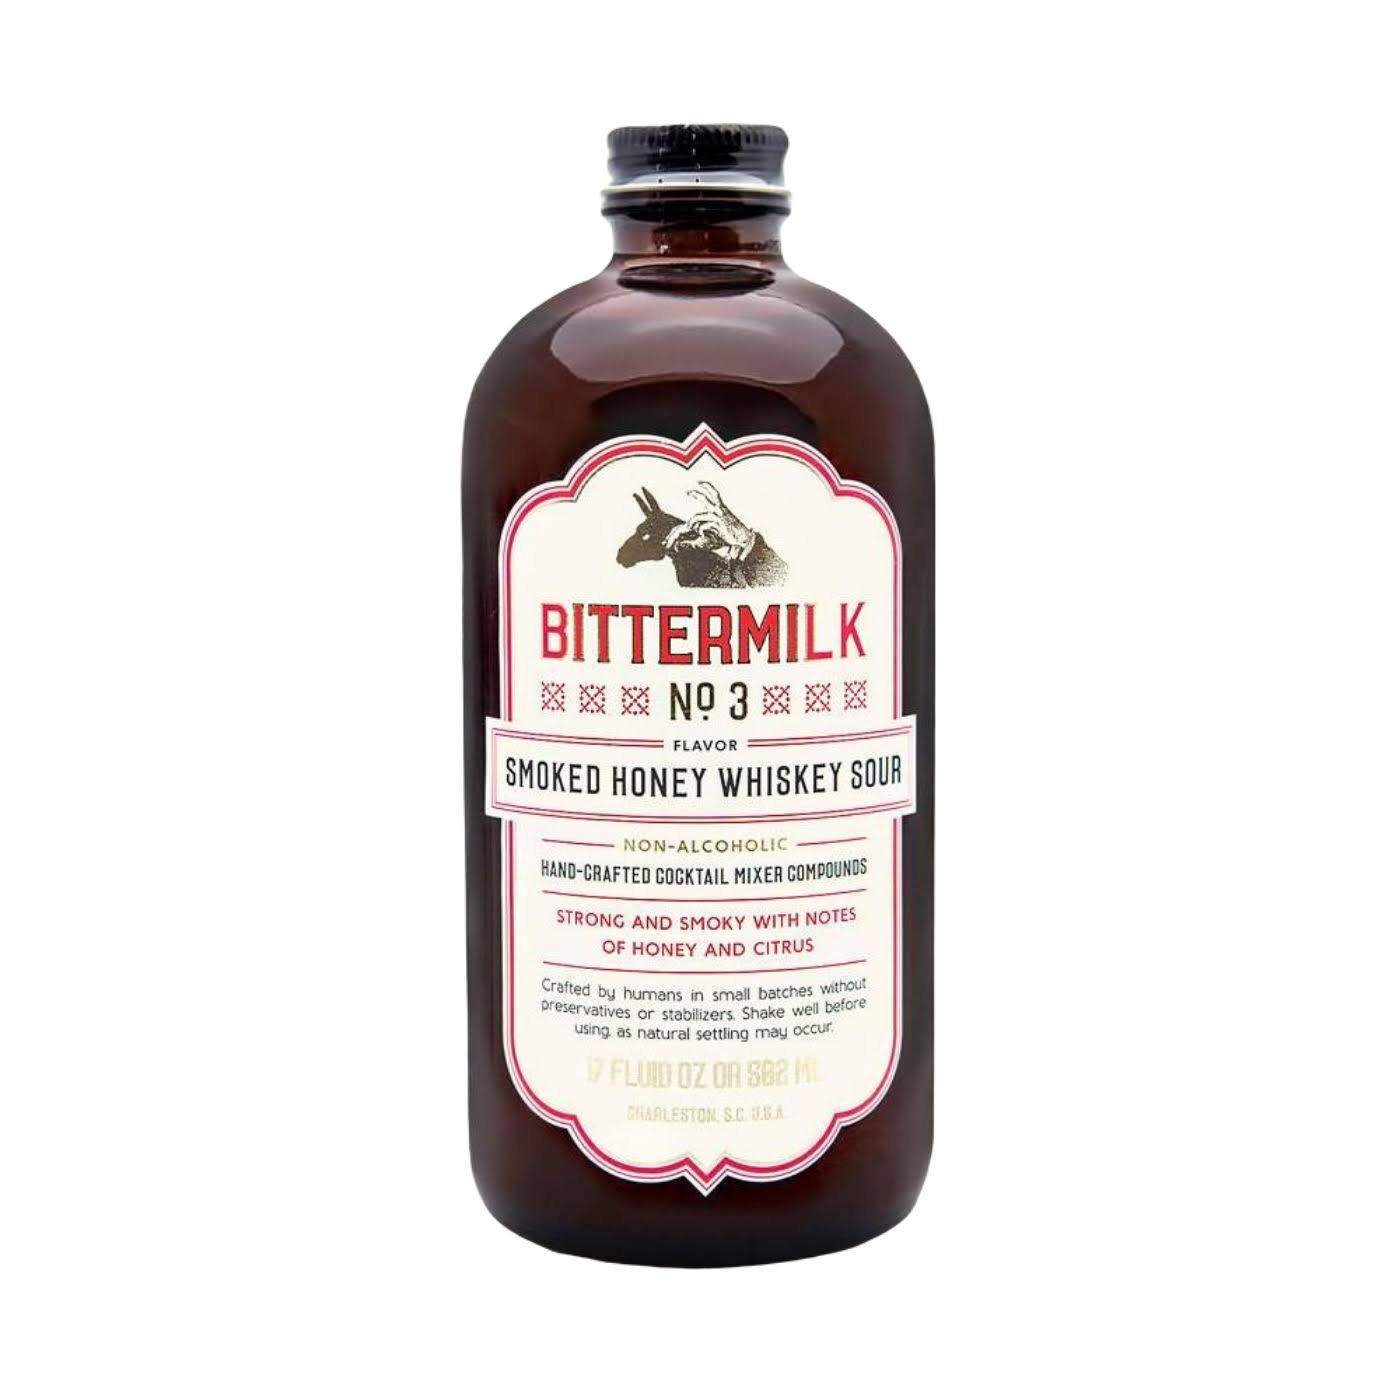 Bittermilk Number 3 Smoked Honey Whiskey Sour Cocktail Mixer